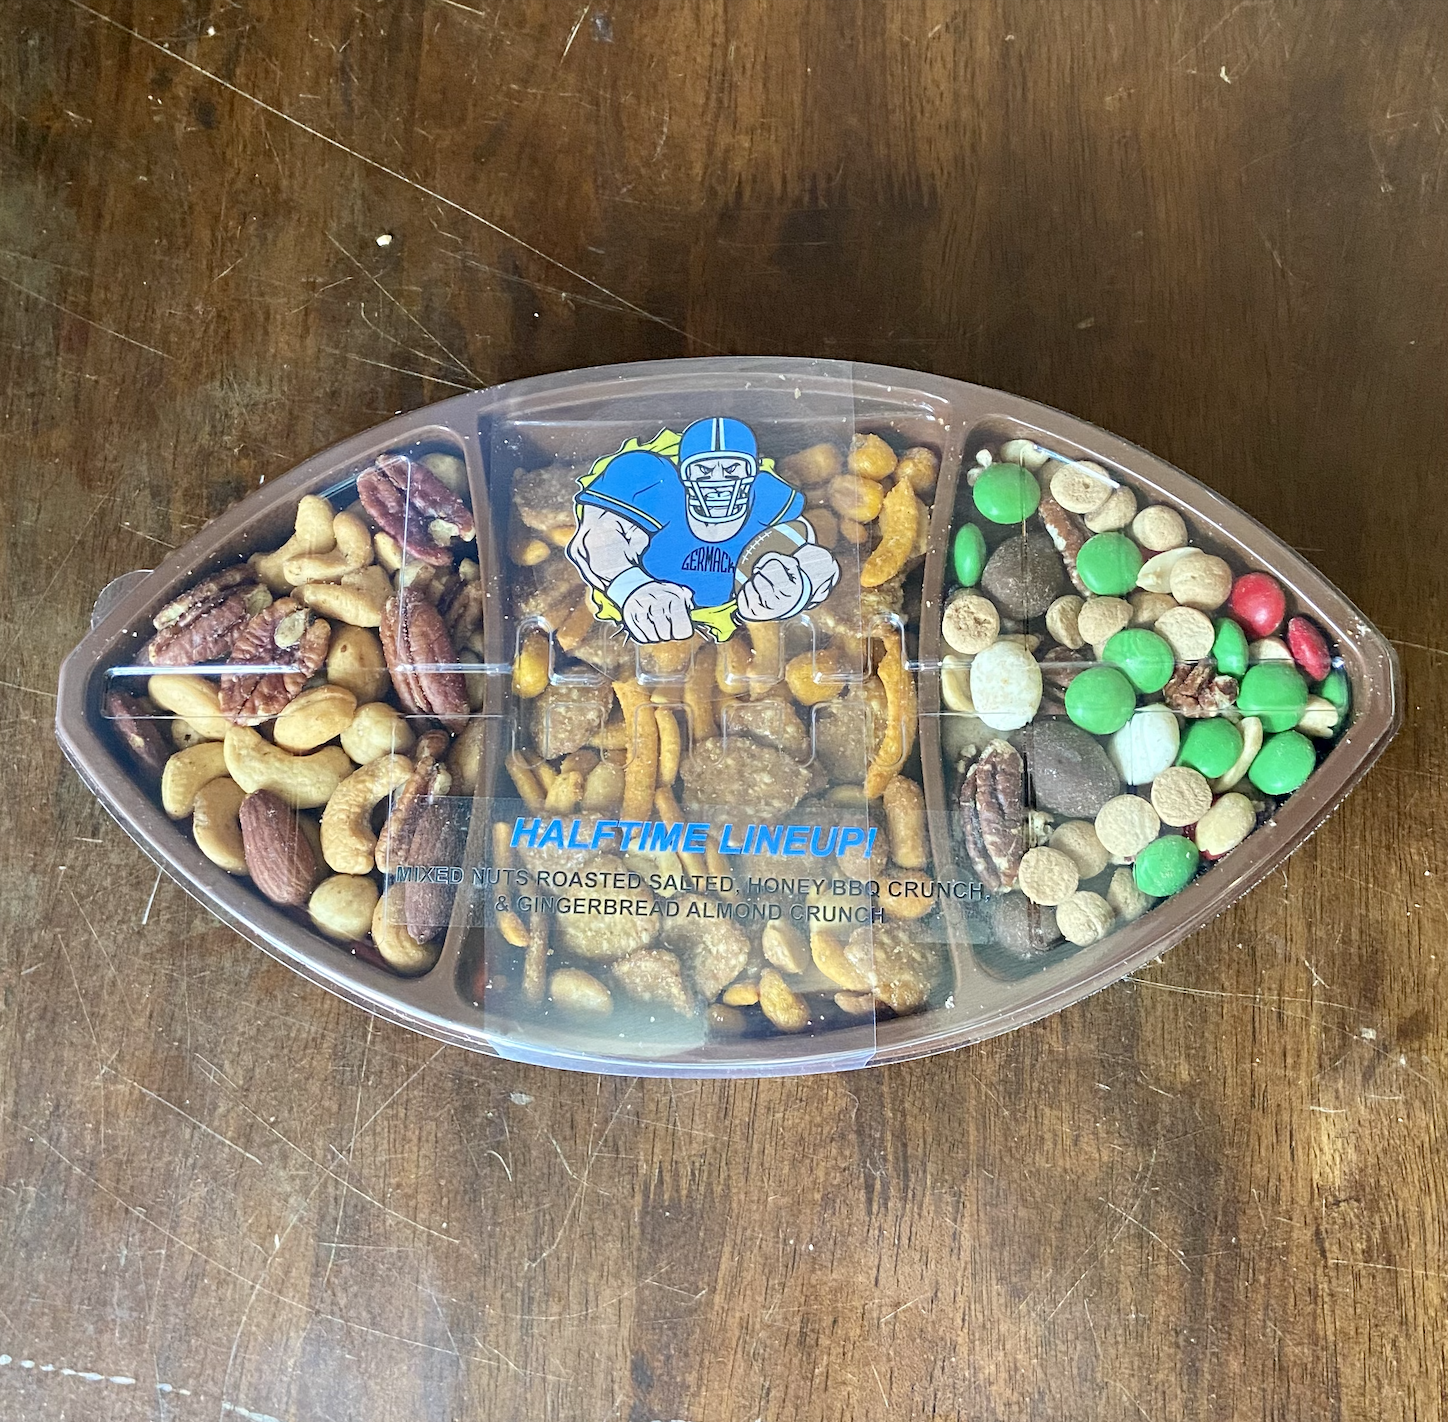 Picture Halftime Lineup Football Tray (Mixed Nuts, Honey BBQ Crunch, Gingerbread Almond Crunch)